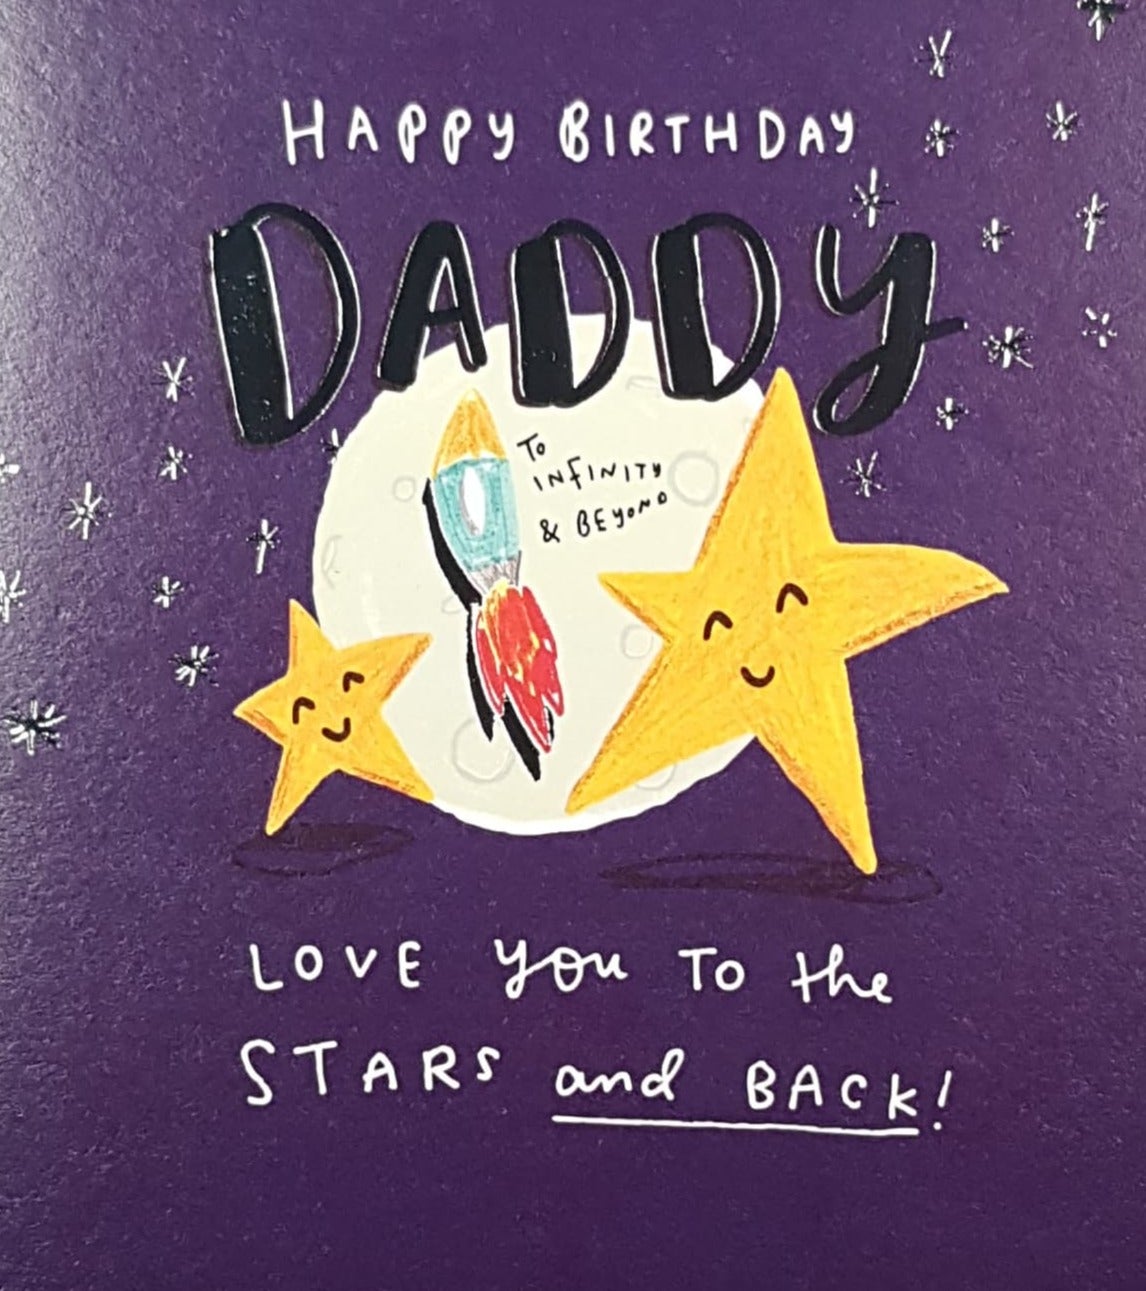 Birthday Card - Daddy / Drawing Of Rocket & Stars In Space